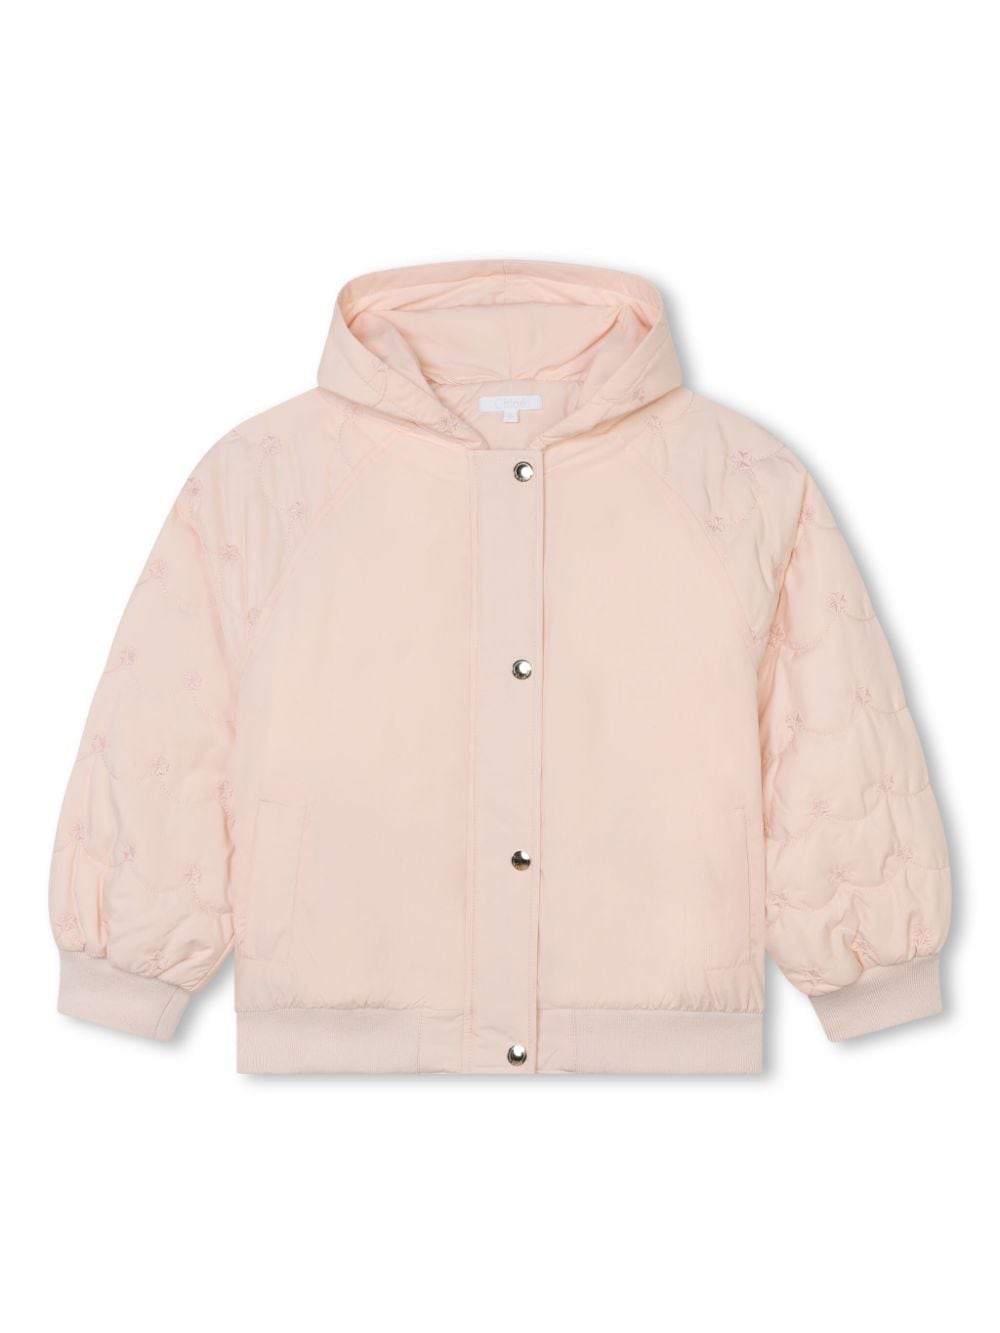 Chloé Kids' Floral-embroidered Quilted Jacket In Pink